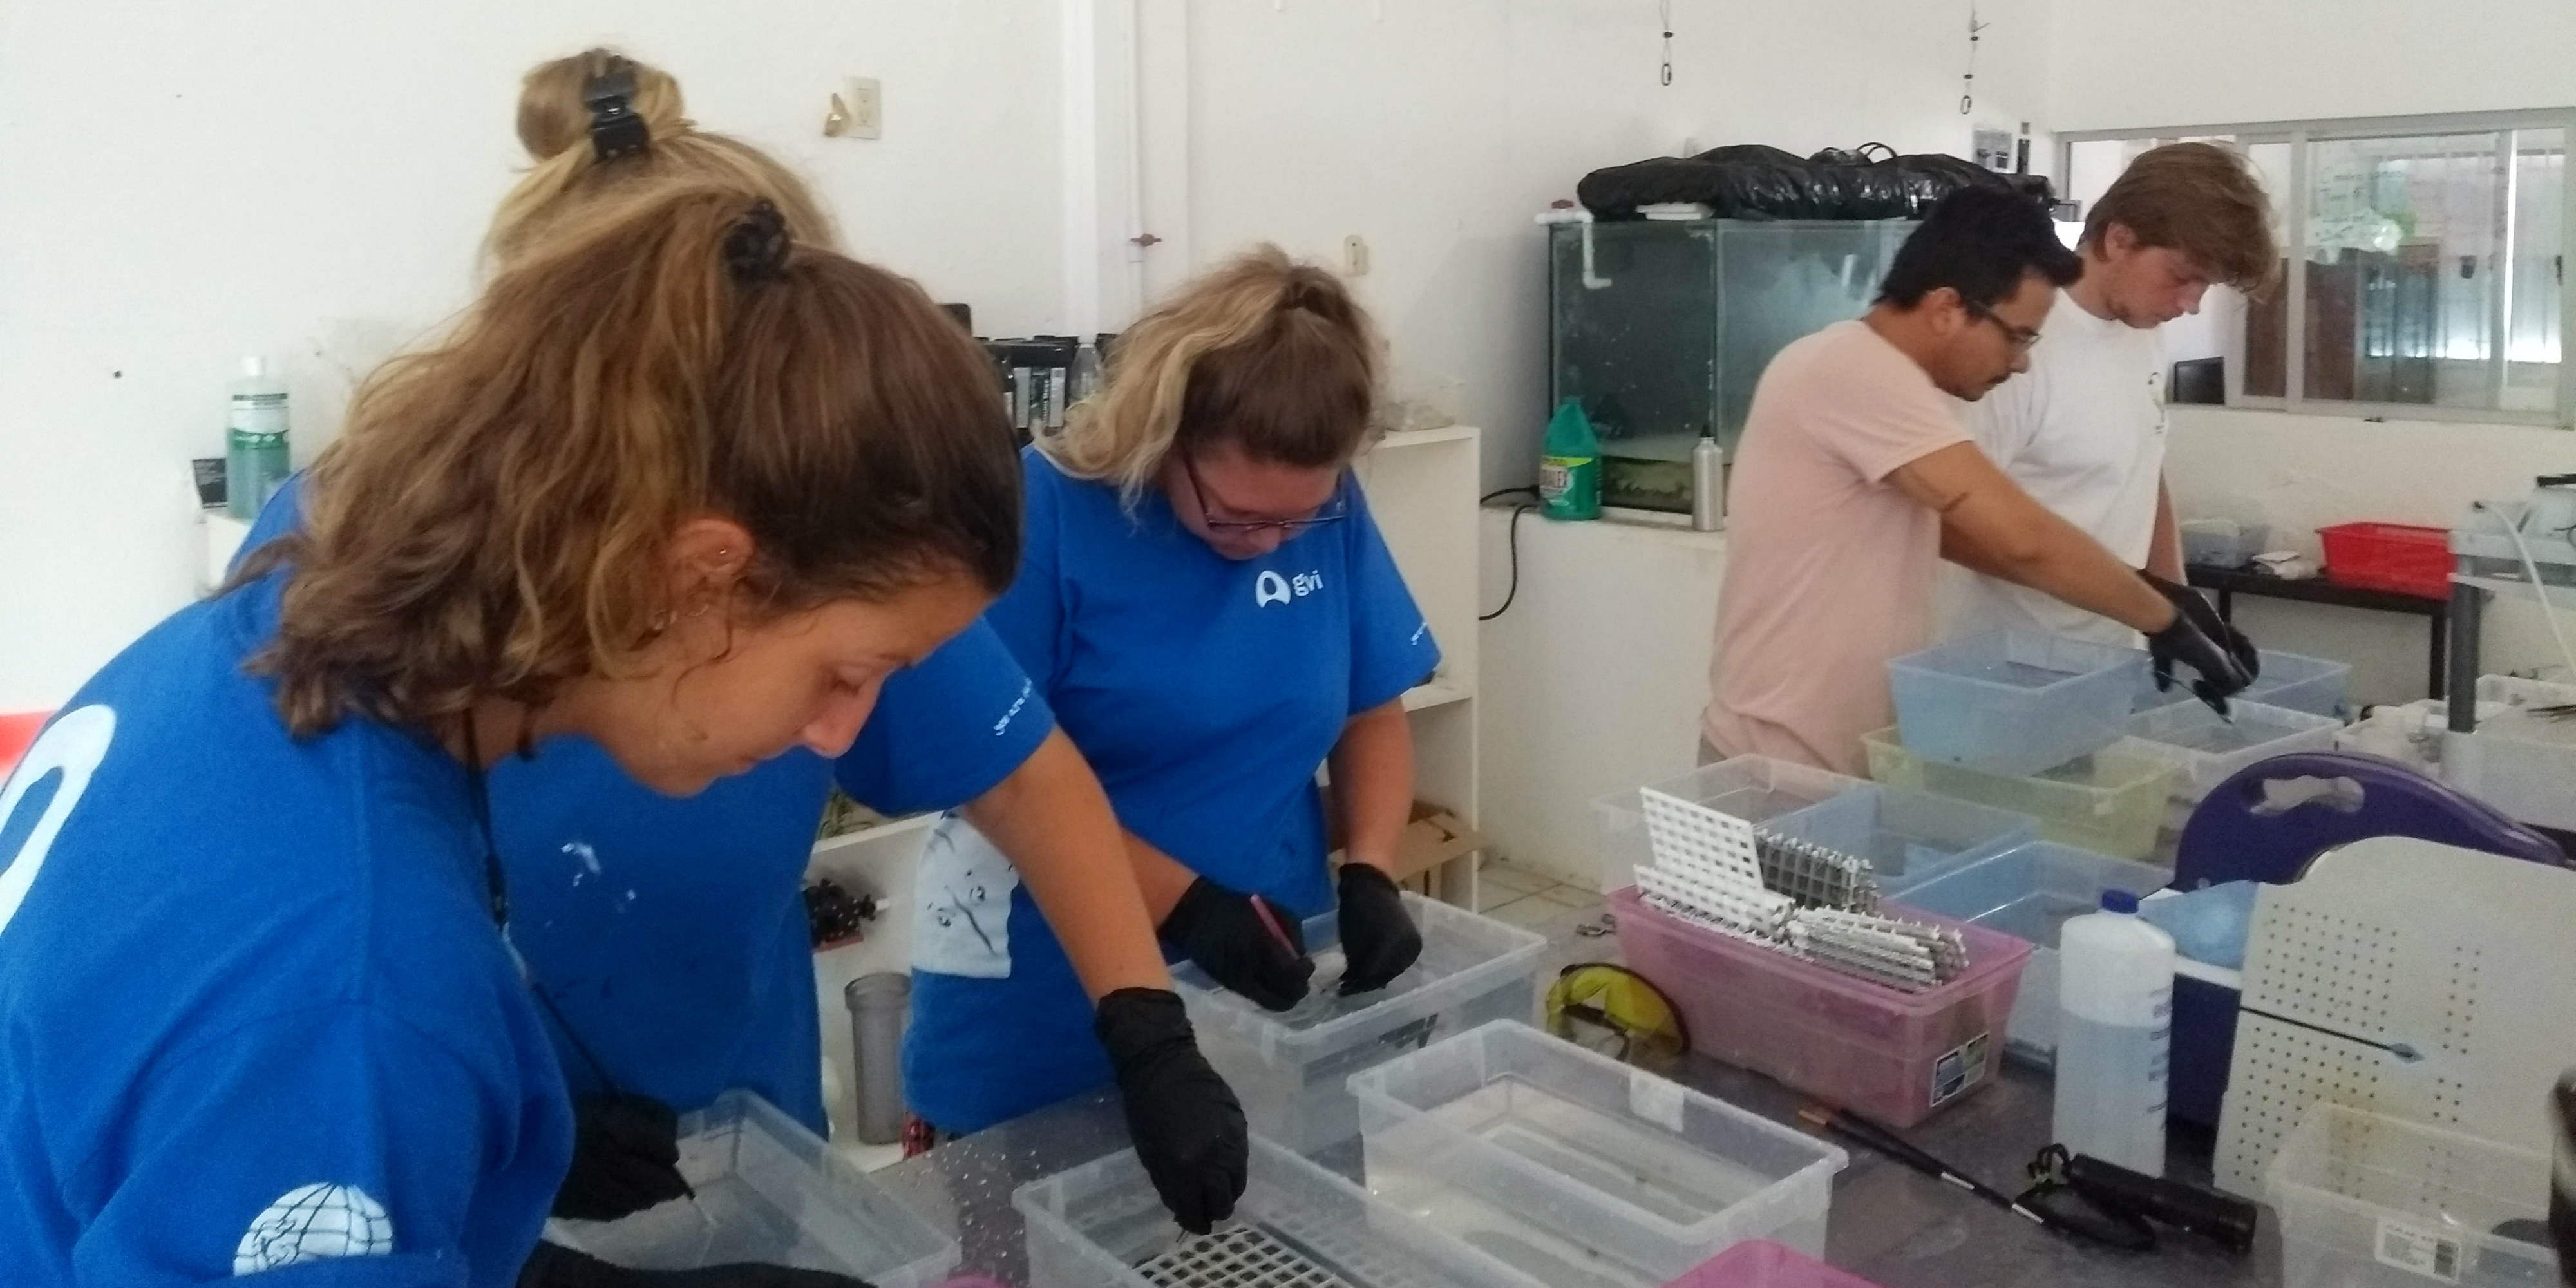 GVI participants work on growing coral polyps in Puerto Morelos, Mexico, as part of efforts to conserve the coral reef.